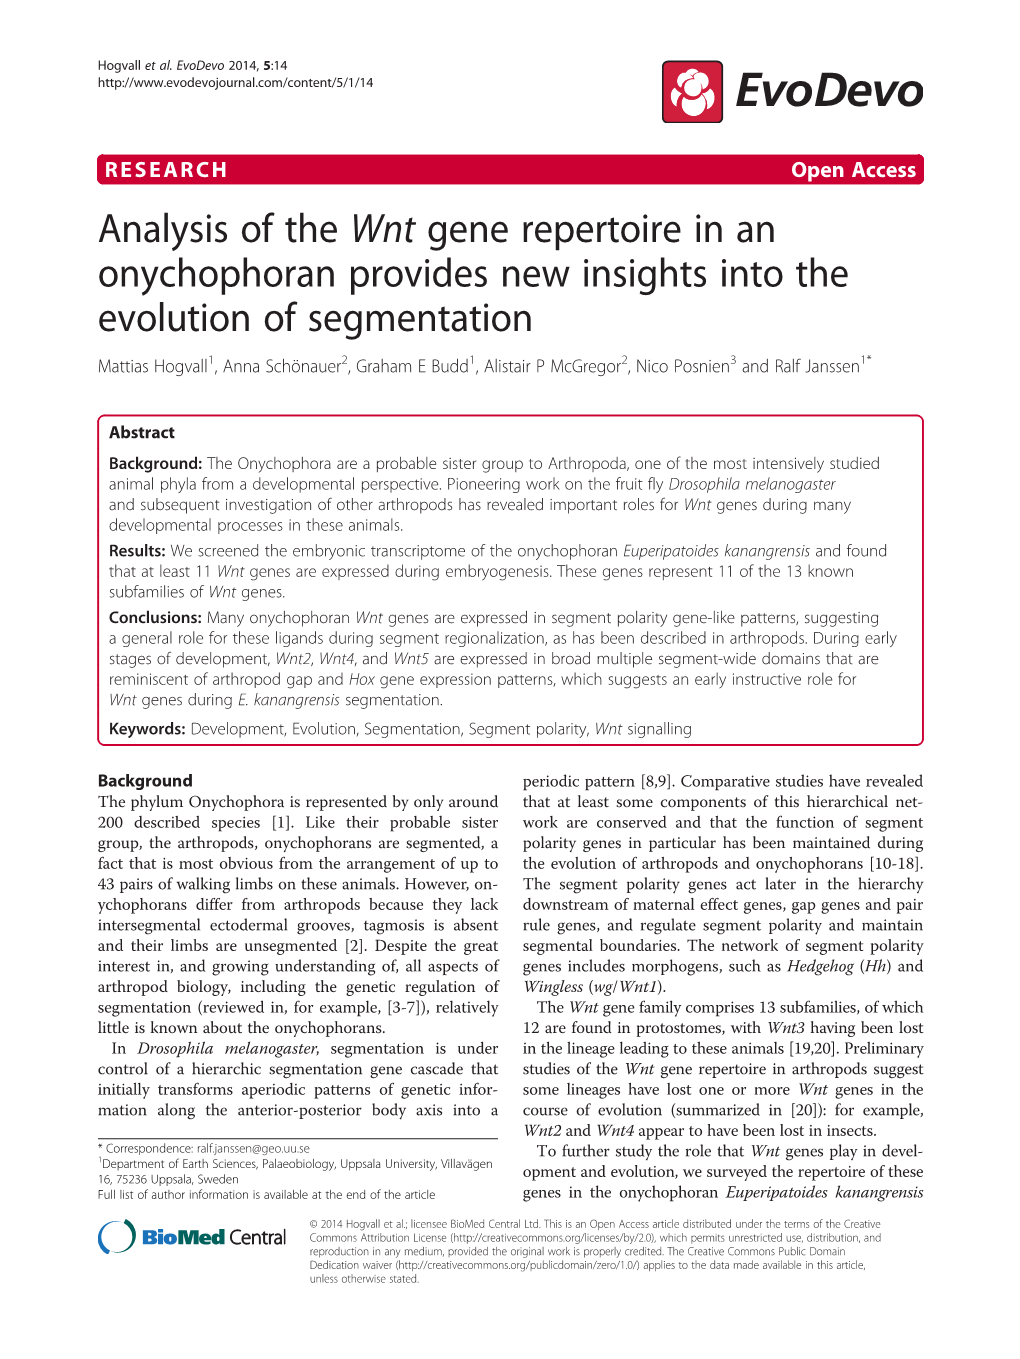 Analysis of the Wnt Gene Repertoire in an Onychophoran Provides New